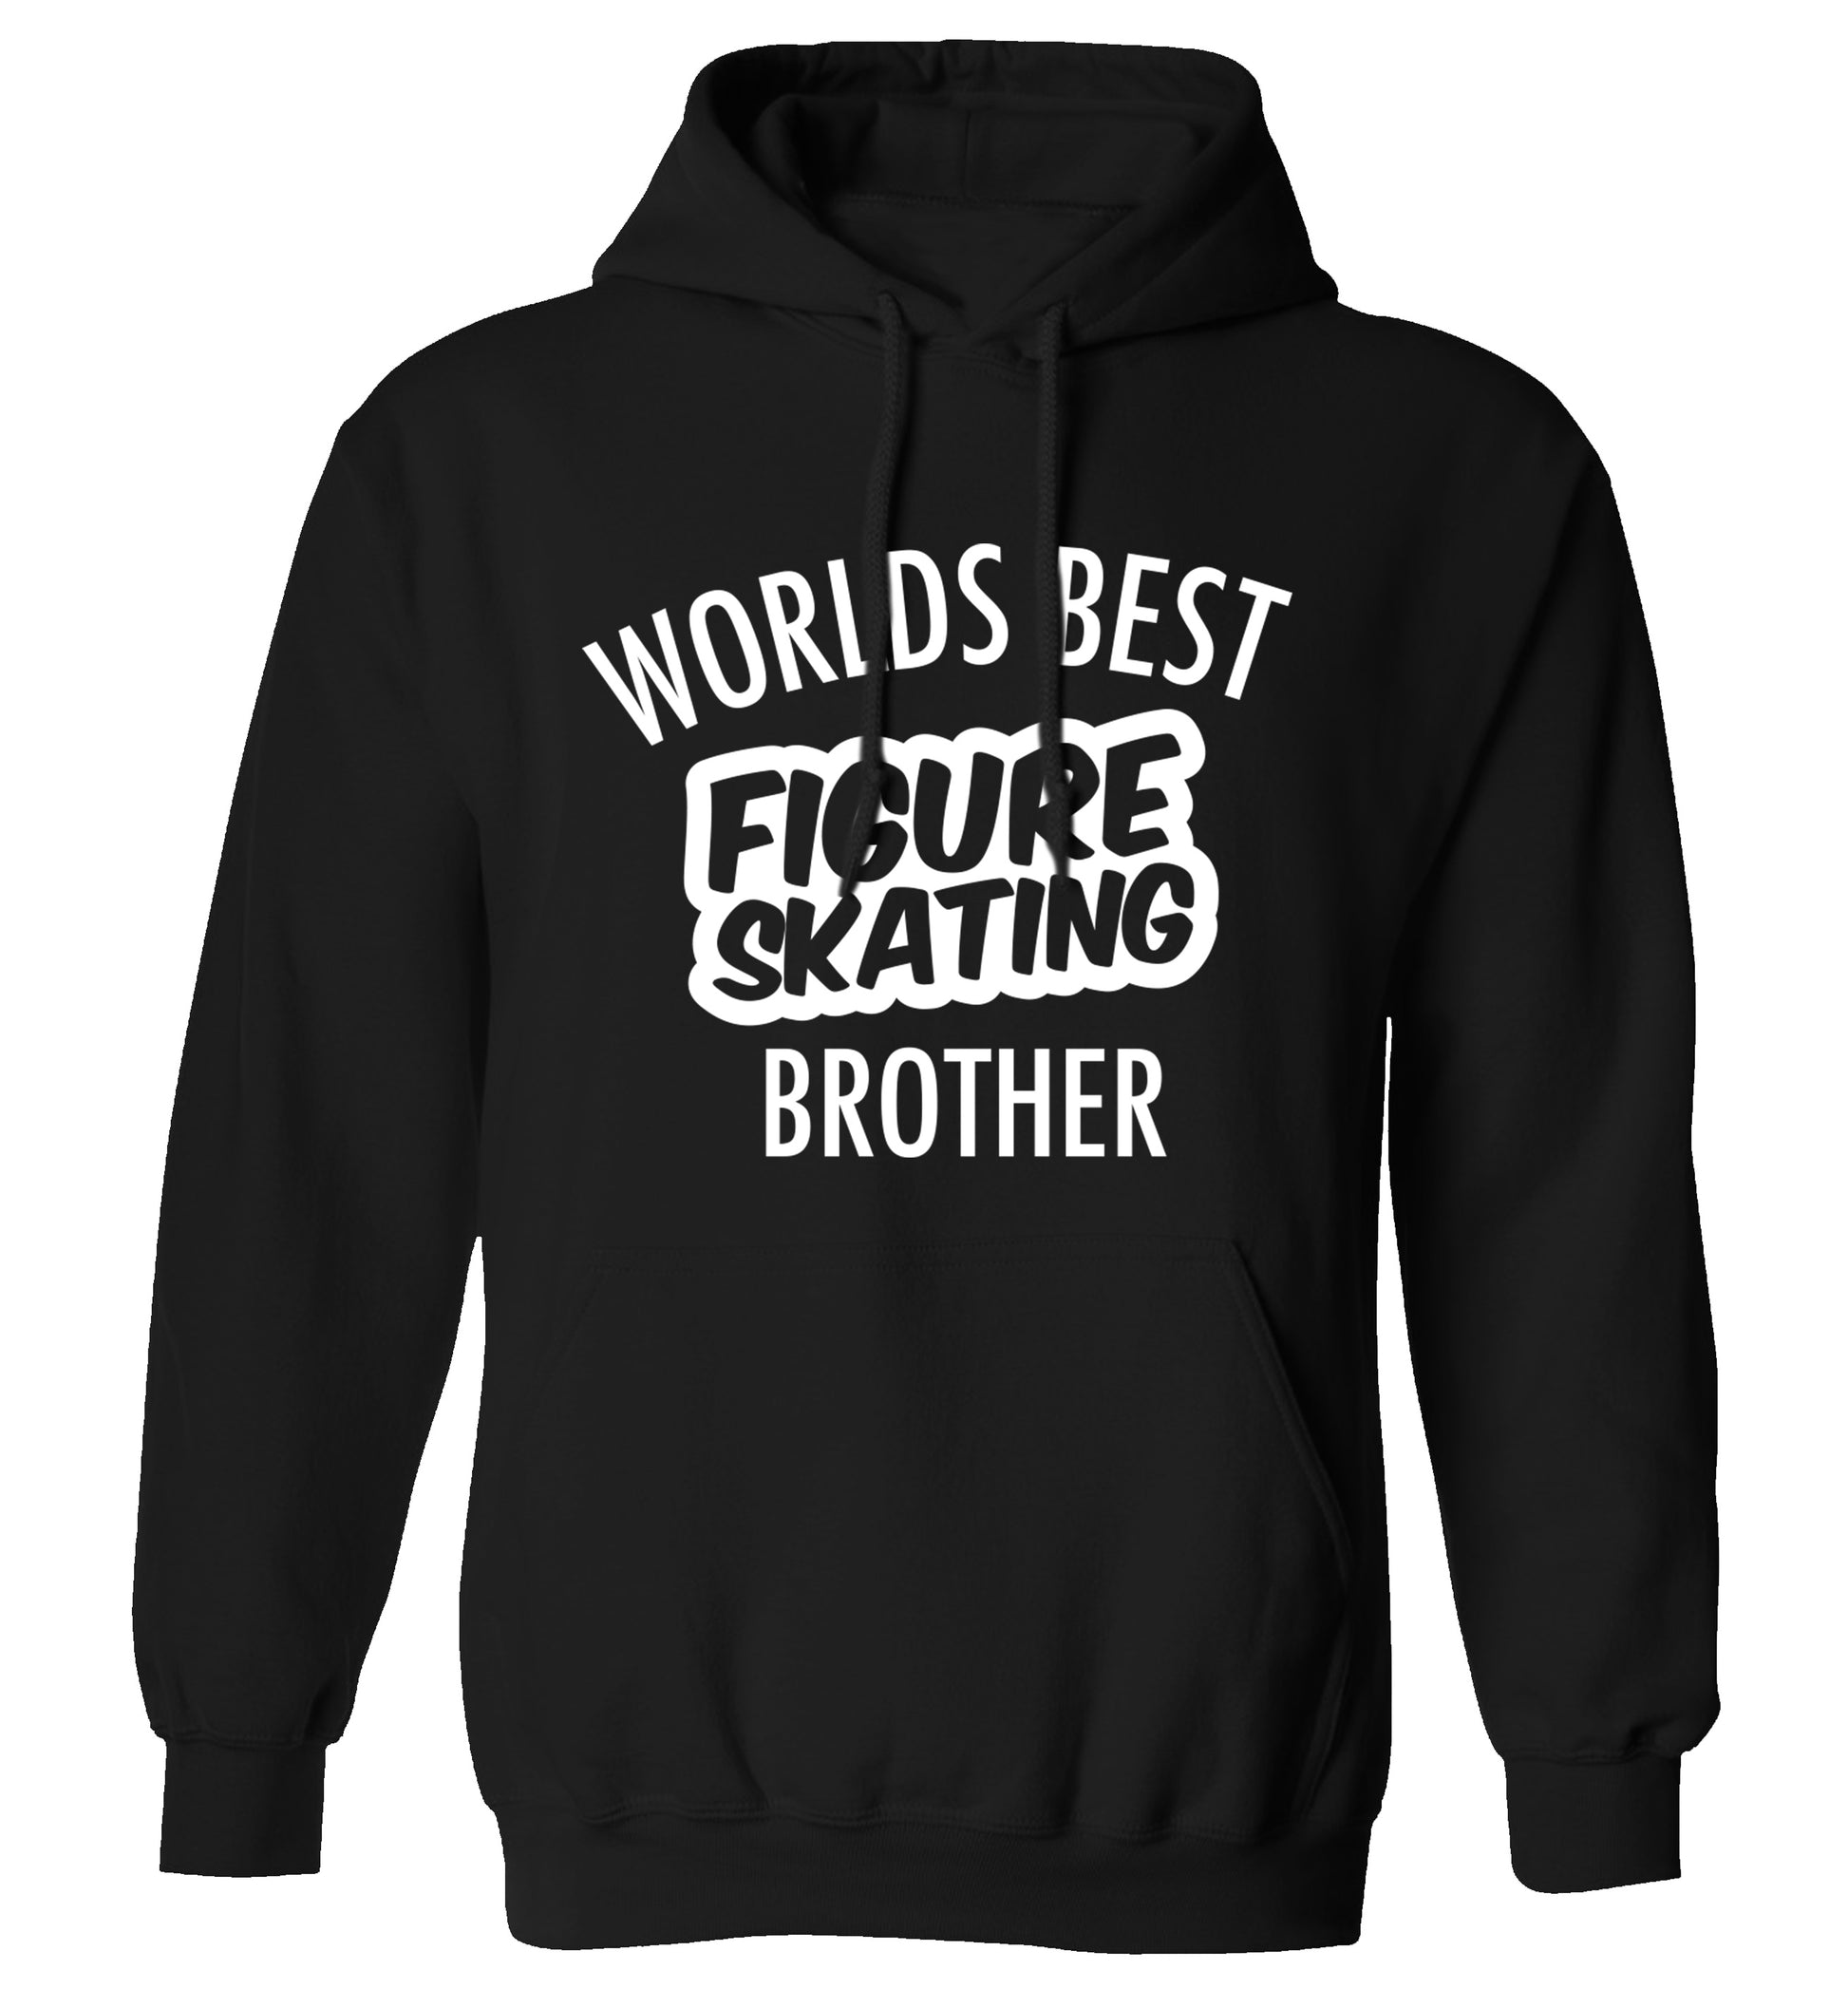 Worlds best figure skating brother adults unisexblack hoodie 2XL